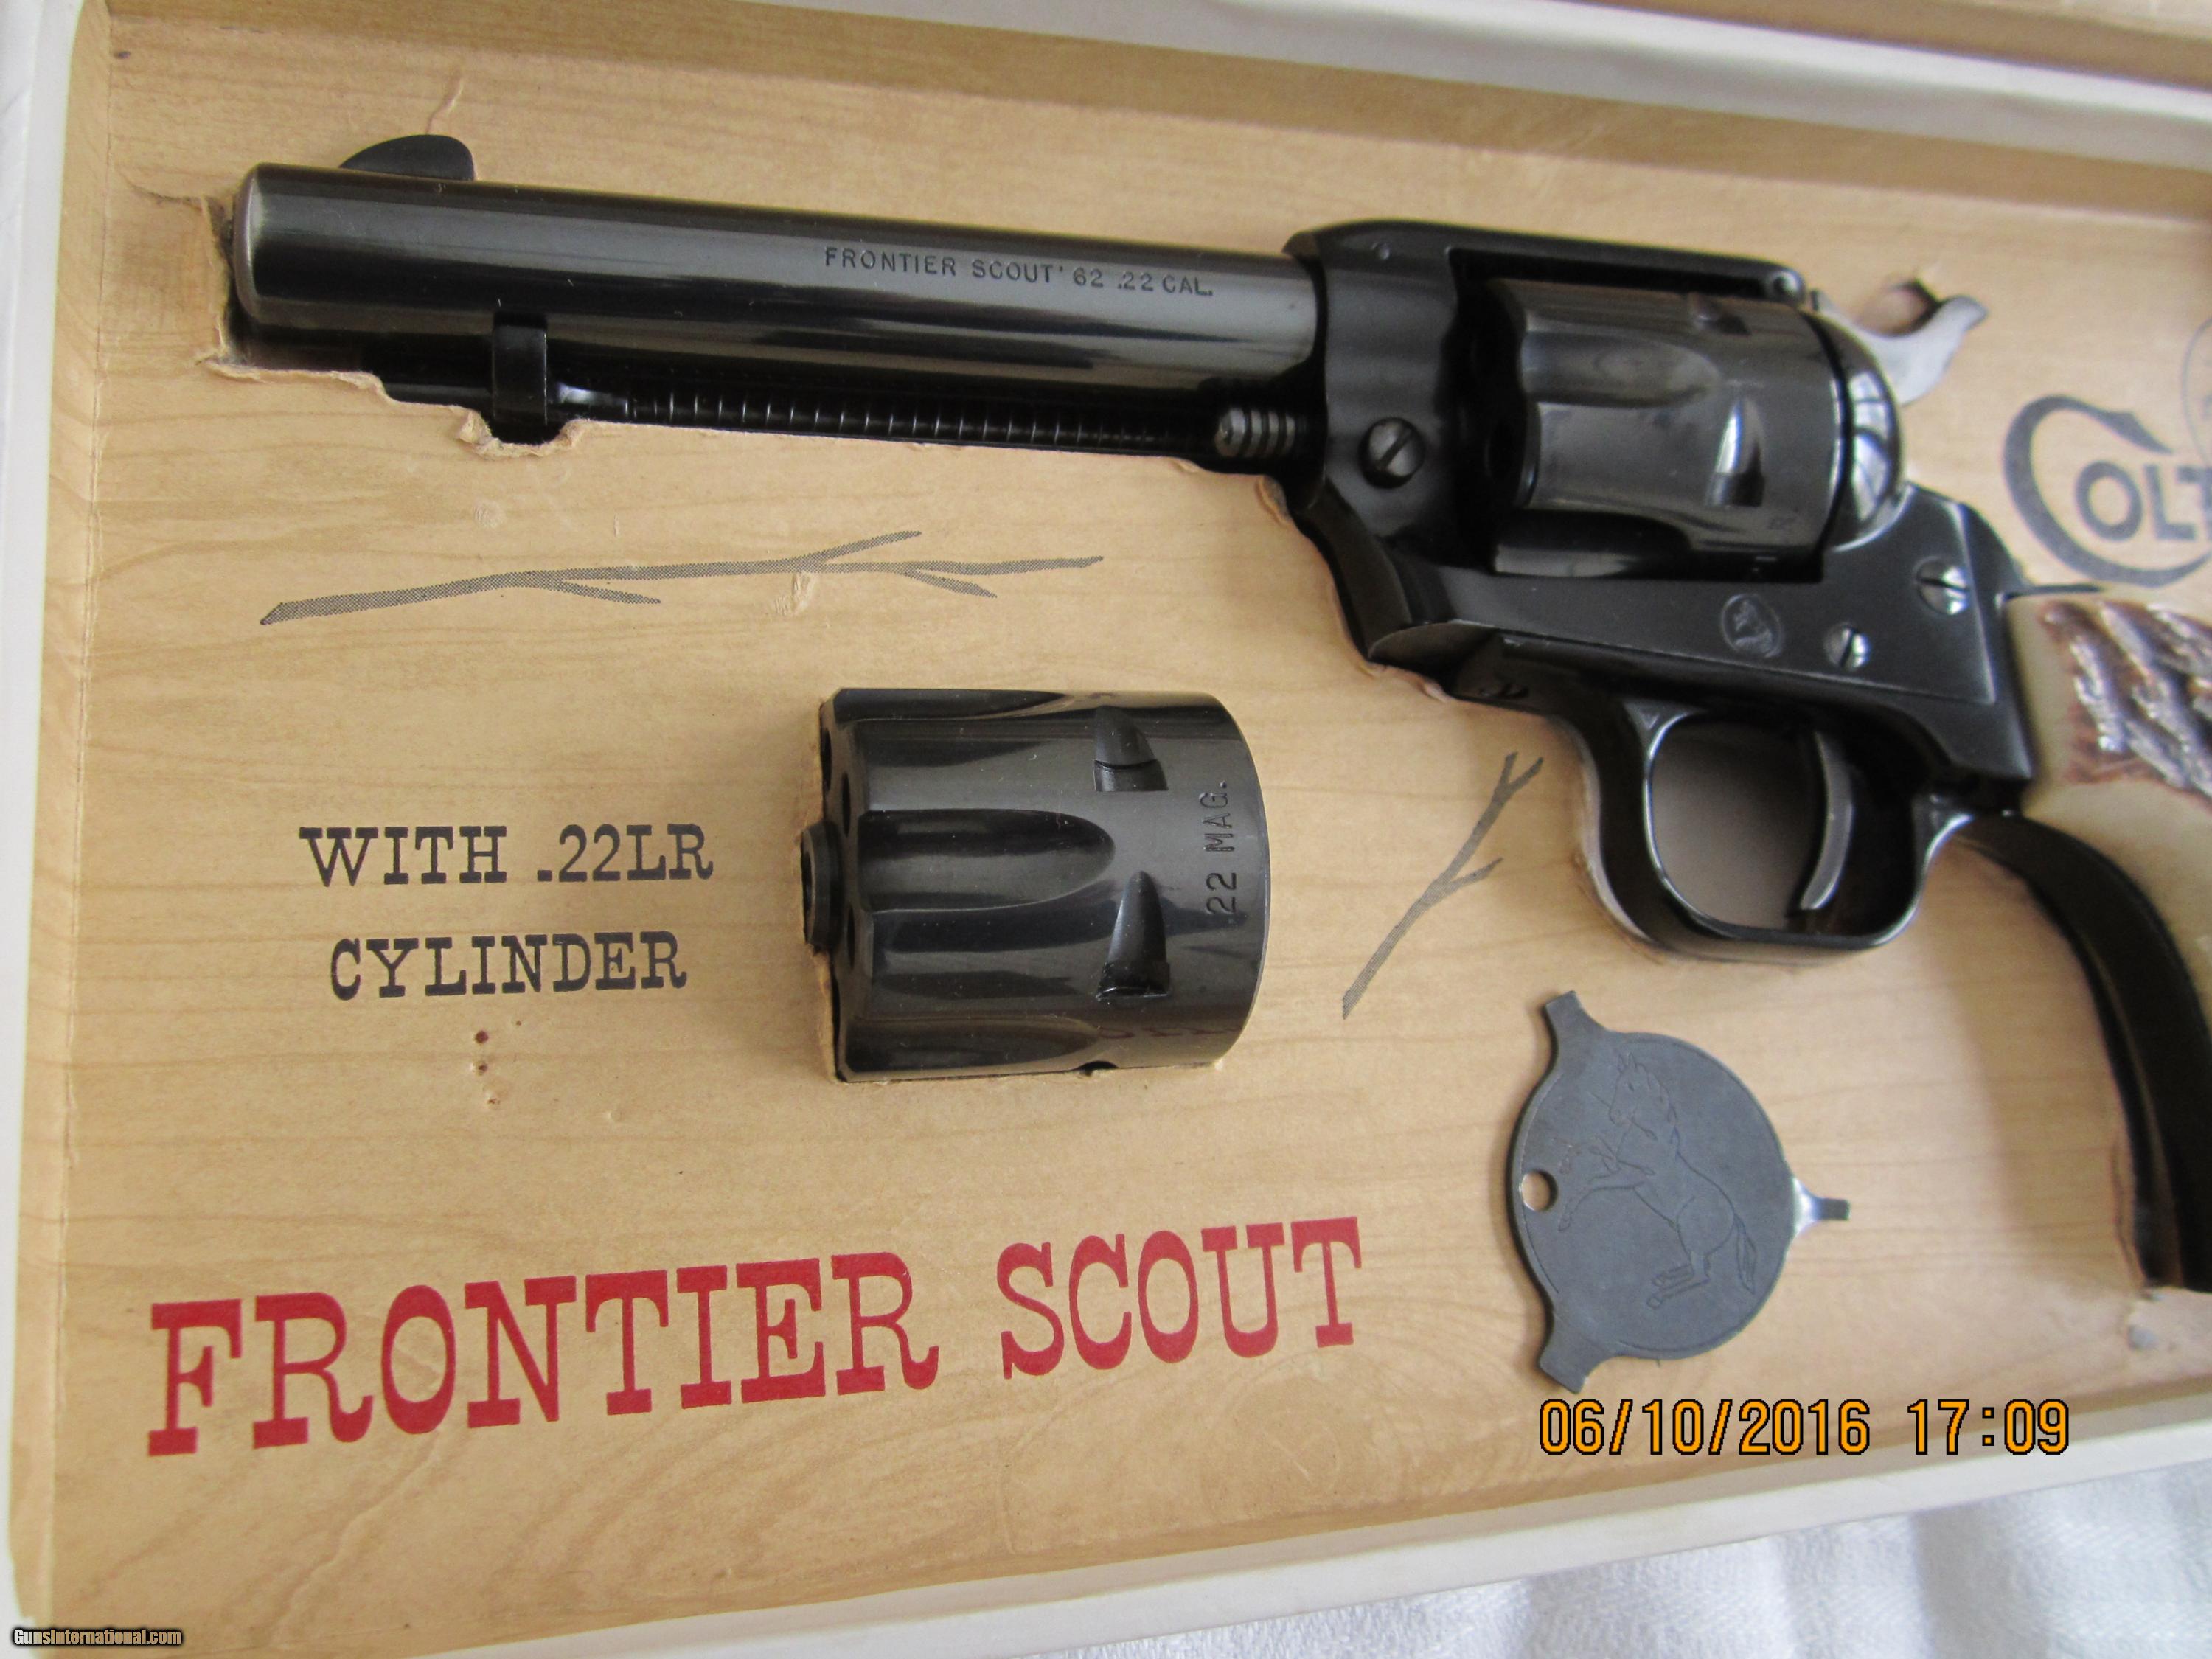 Colt Frontier Scout 62 Single Action Revolvers Safety Instruction Manual